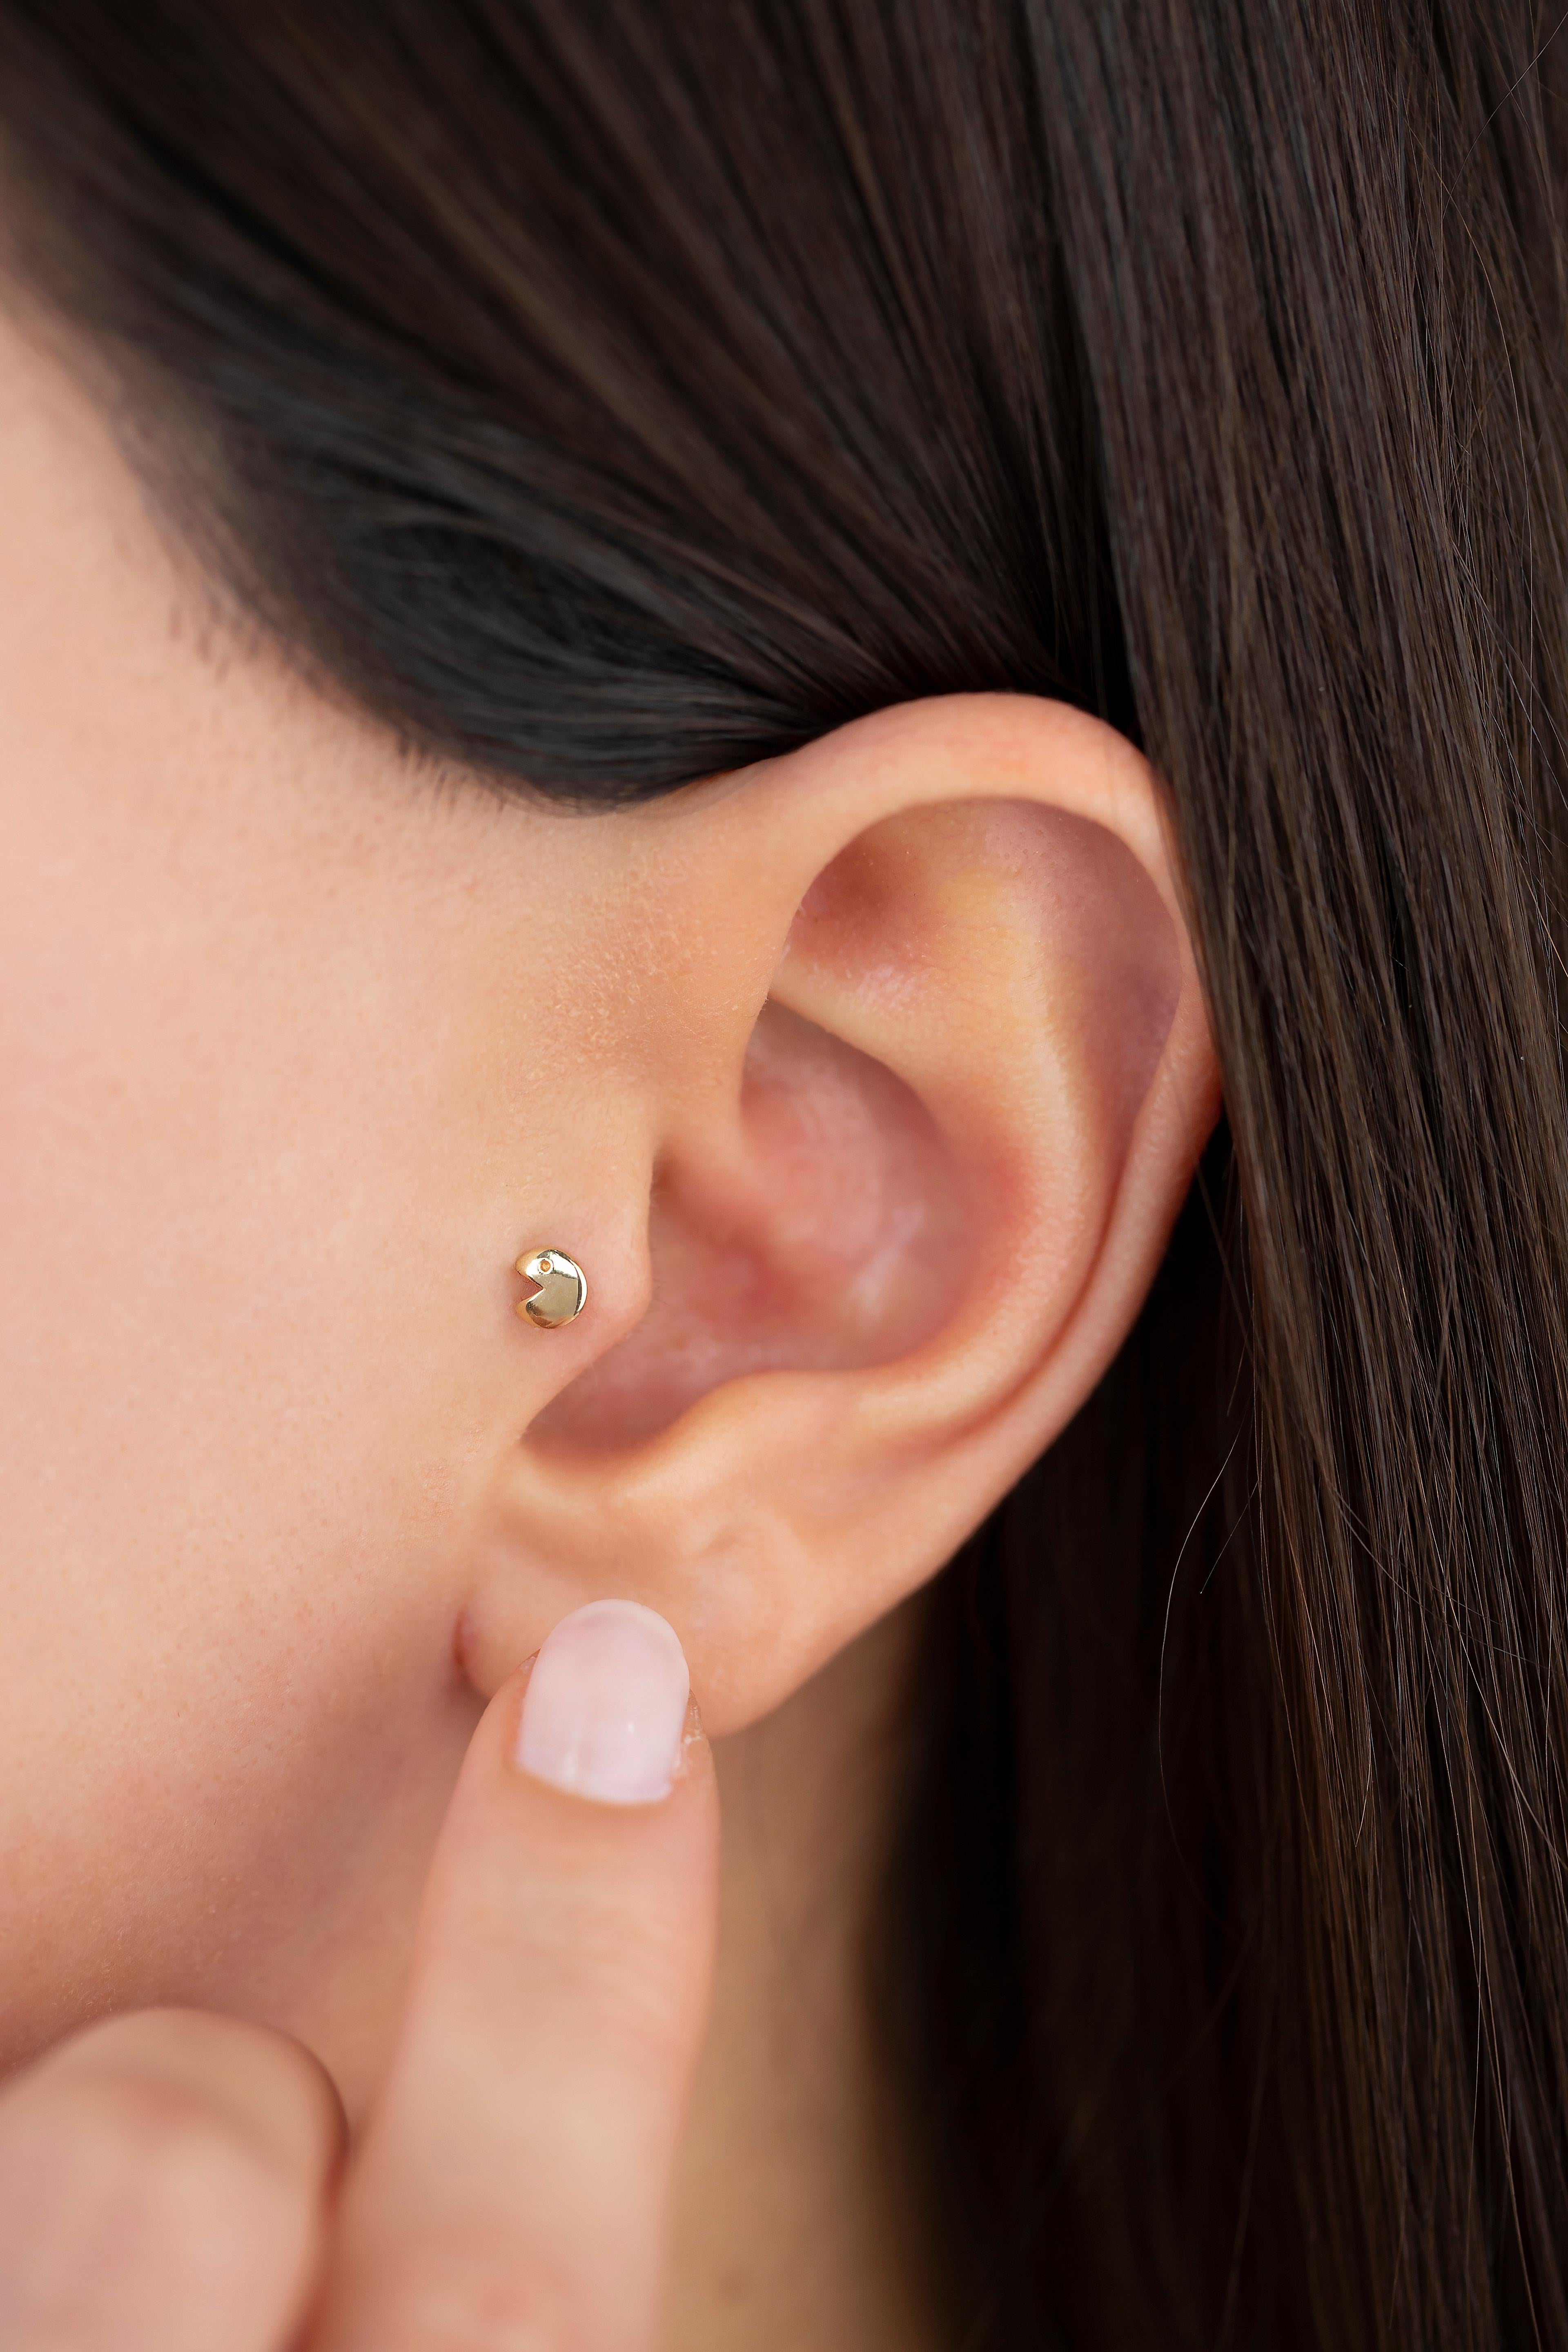 14K Gold Pac Man Piercing, Smiley Face Gold Stud Earring

You can use the piercing as an earring too! Also this piercing is suitable for tragus, nose, helix, lobe, flat, medusa, monreo, labret and stud.

This piercing was made with quality materials